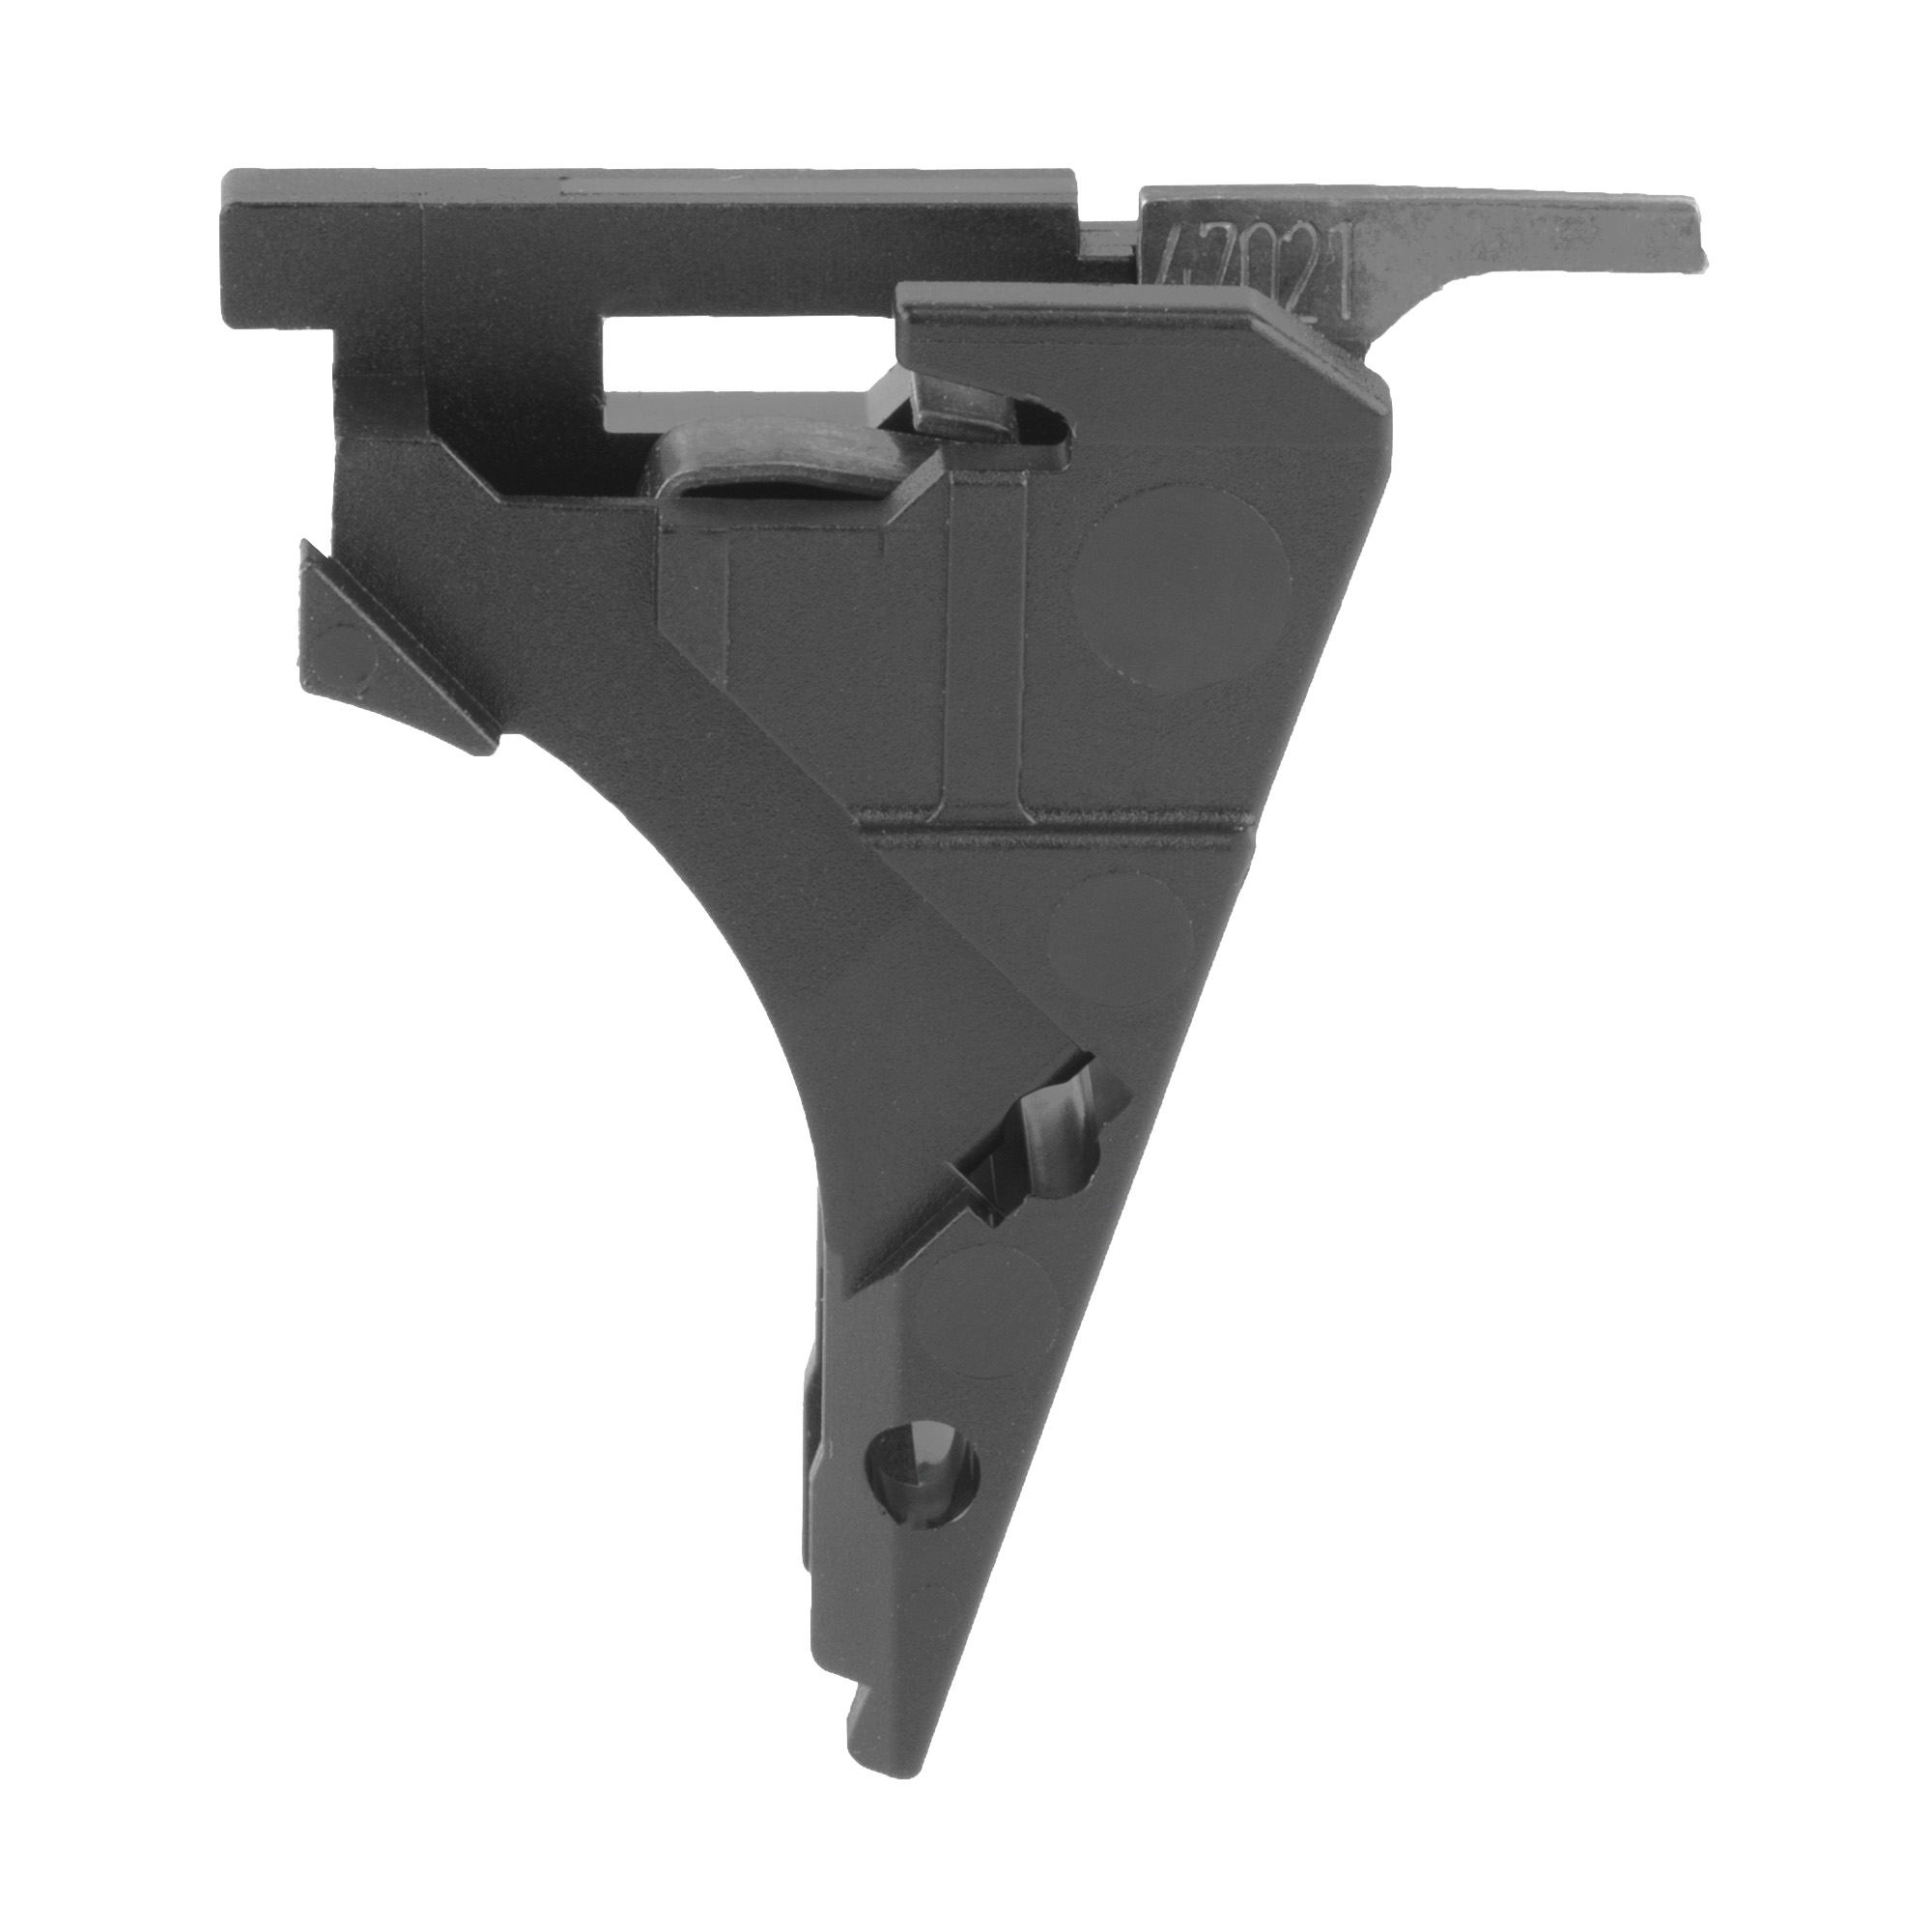 Glock, OEM Trigger Mechanism Housing With Ejector Installed, Fits Gen5 9MM, G19X, G45, Trigger Spring Included